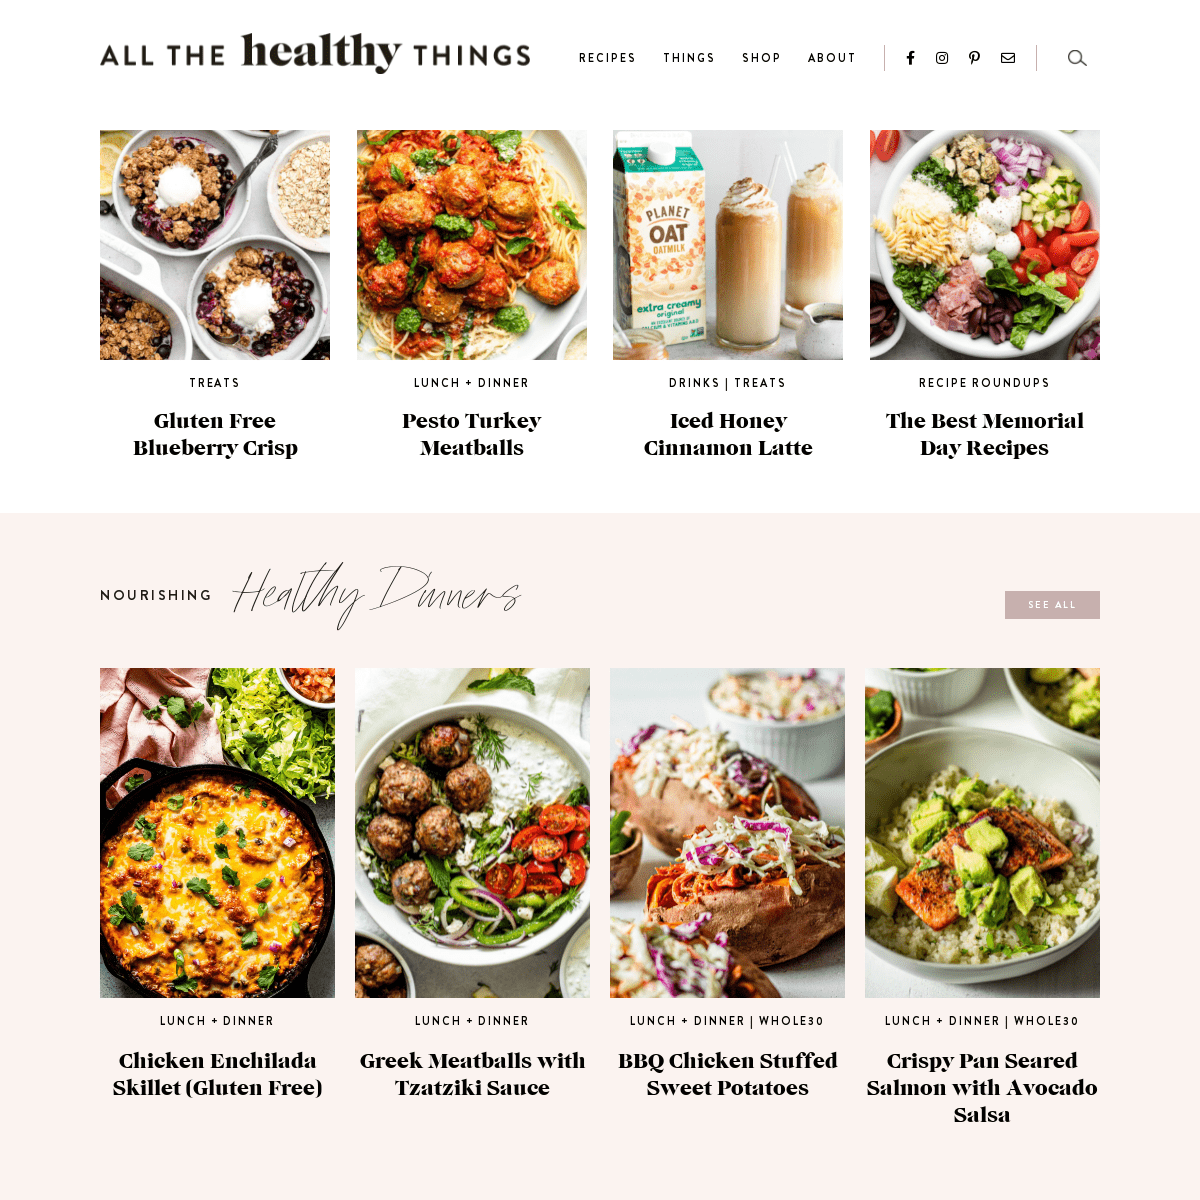 A complete backup of https://allthehealthythings.com